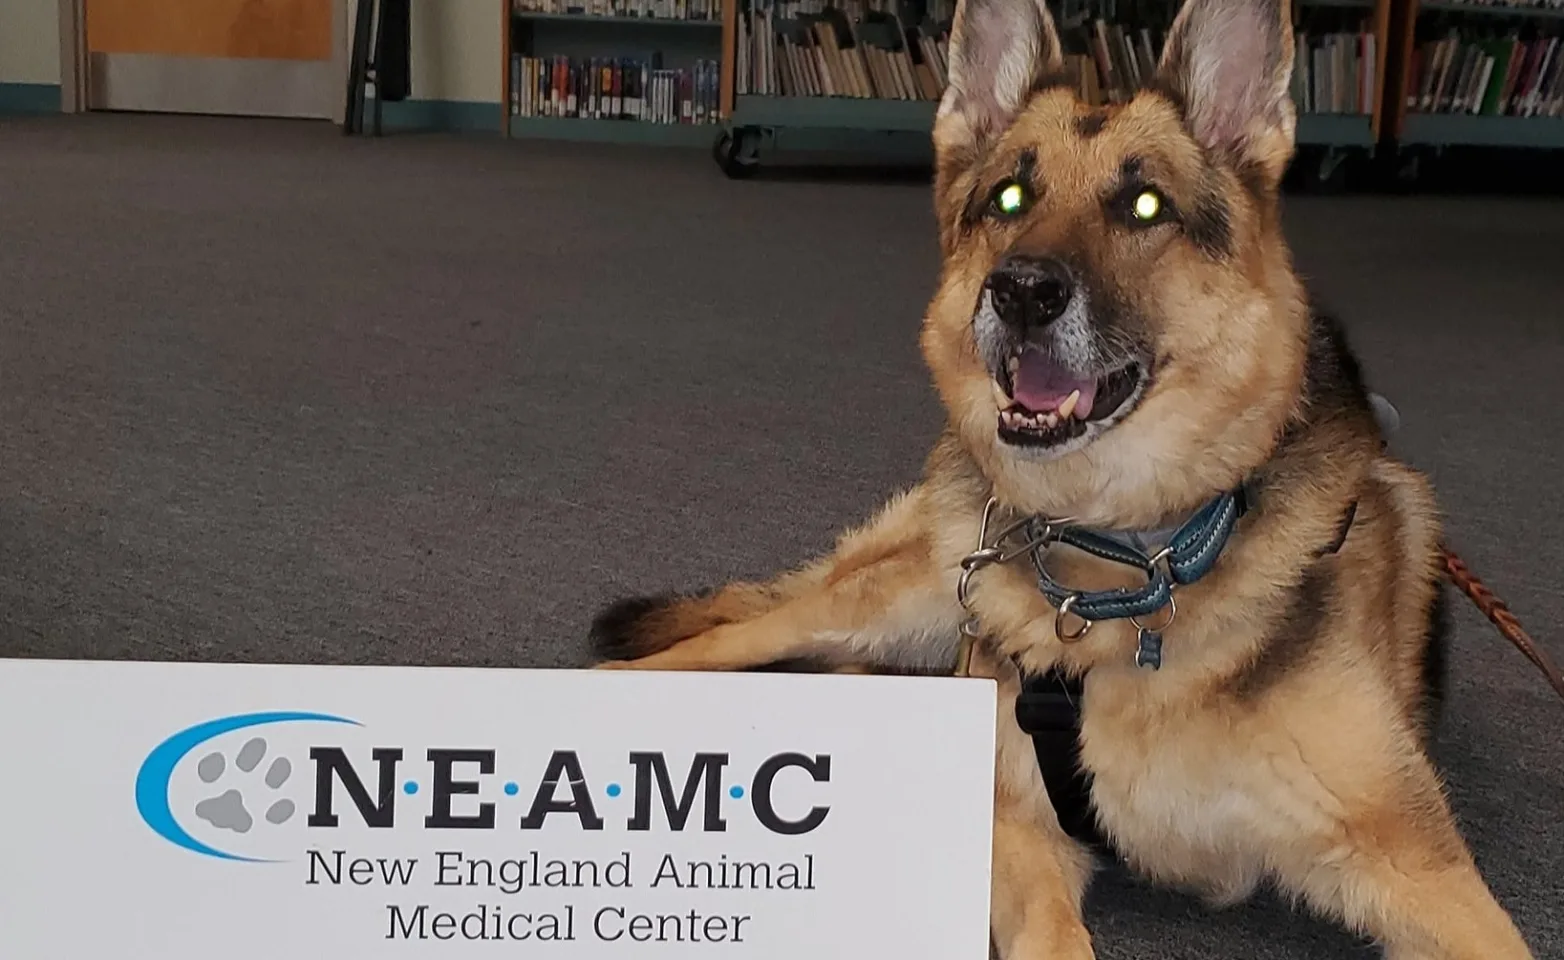 Dog with New England Animal Medical Center sign